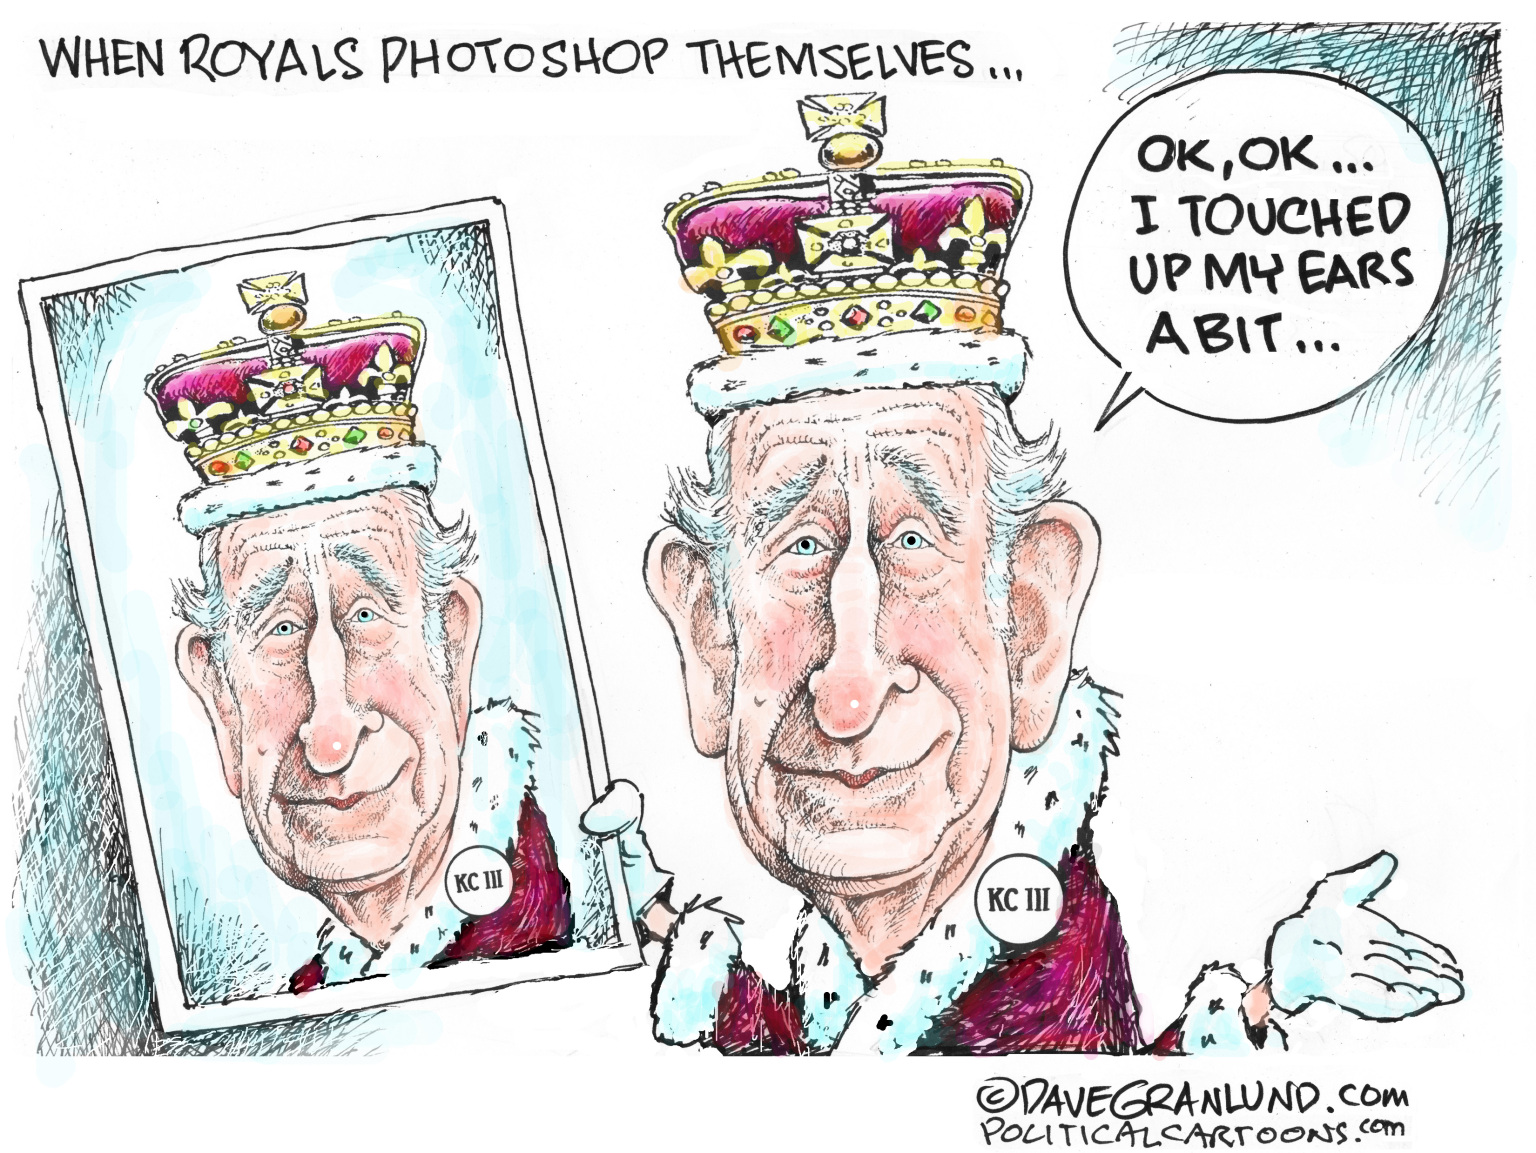 Royals Using Photoshop - By Dave Granlund